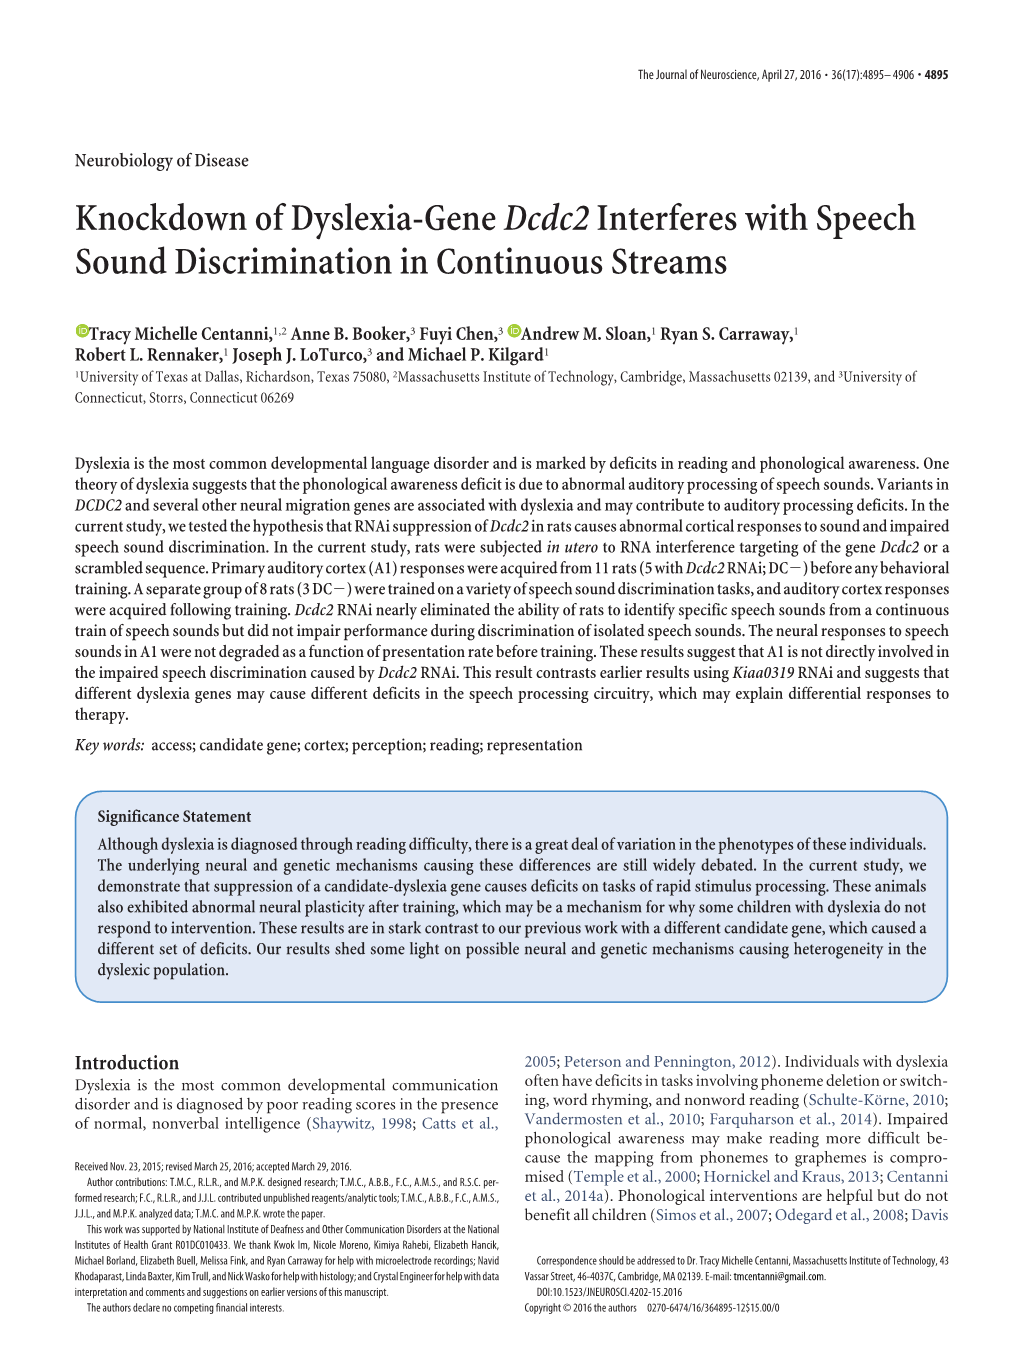 Knockdown of Dyslexia-Gene Dcdc2 Interferes with Speech Sound Discrimination in Continuous Streams